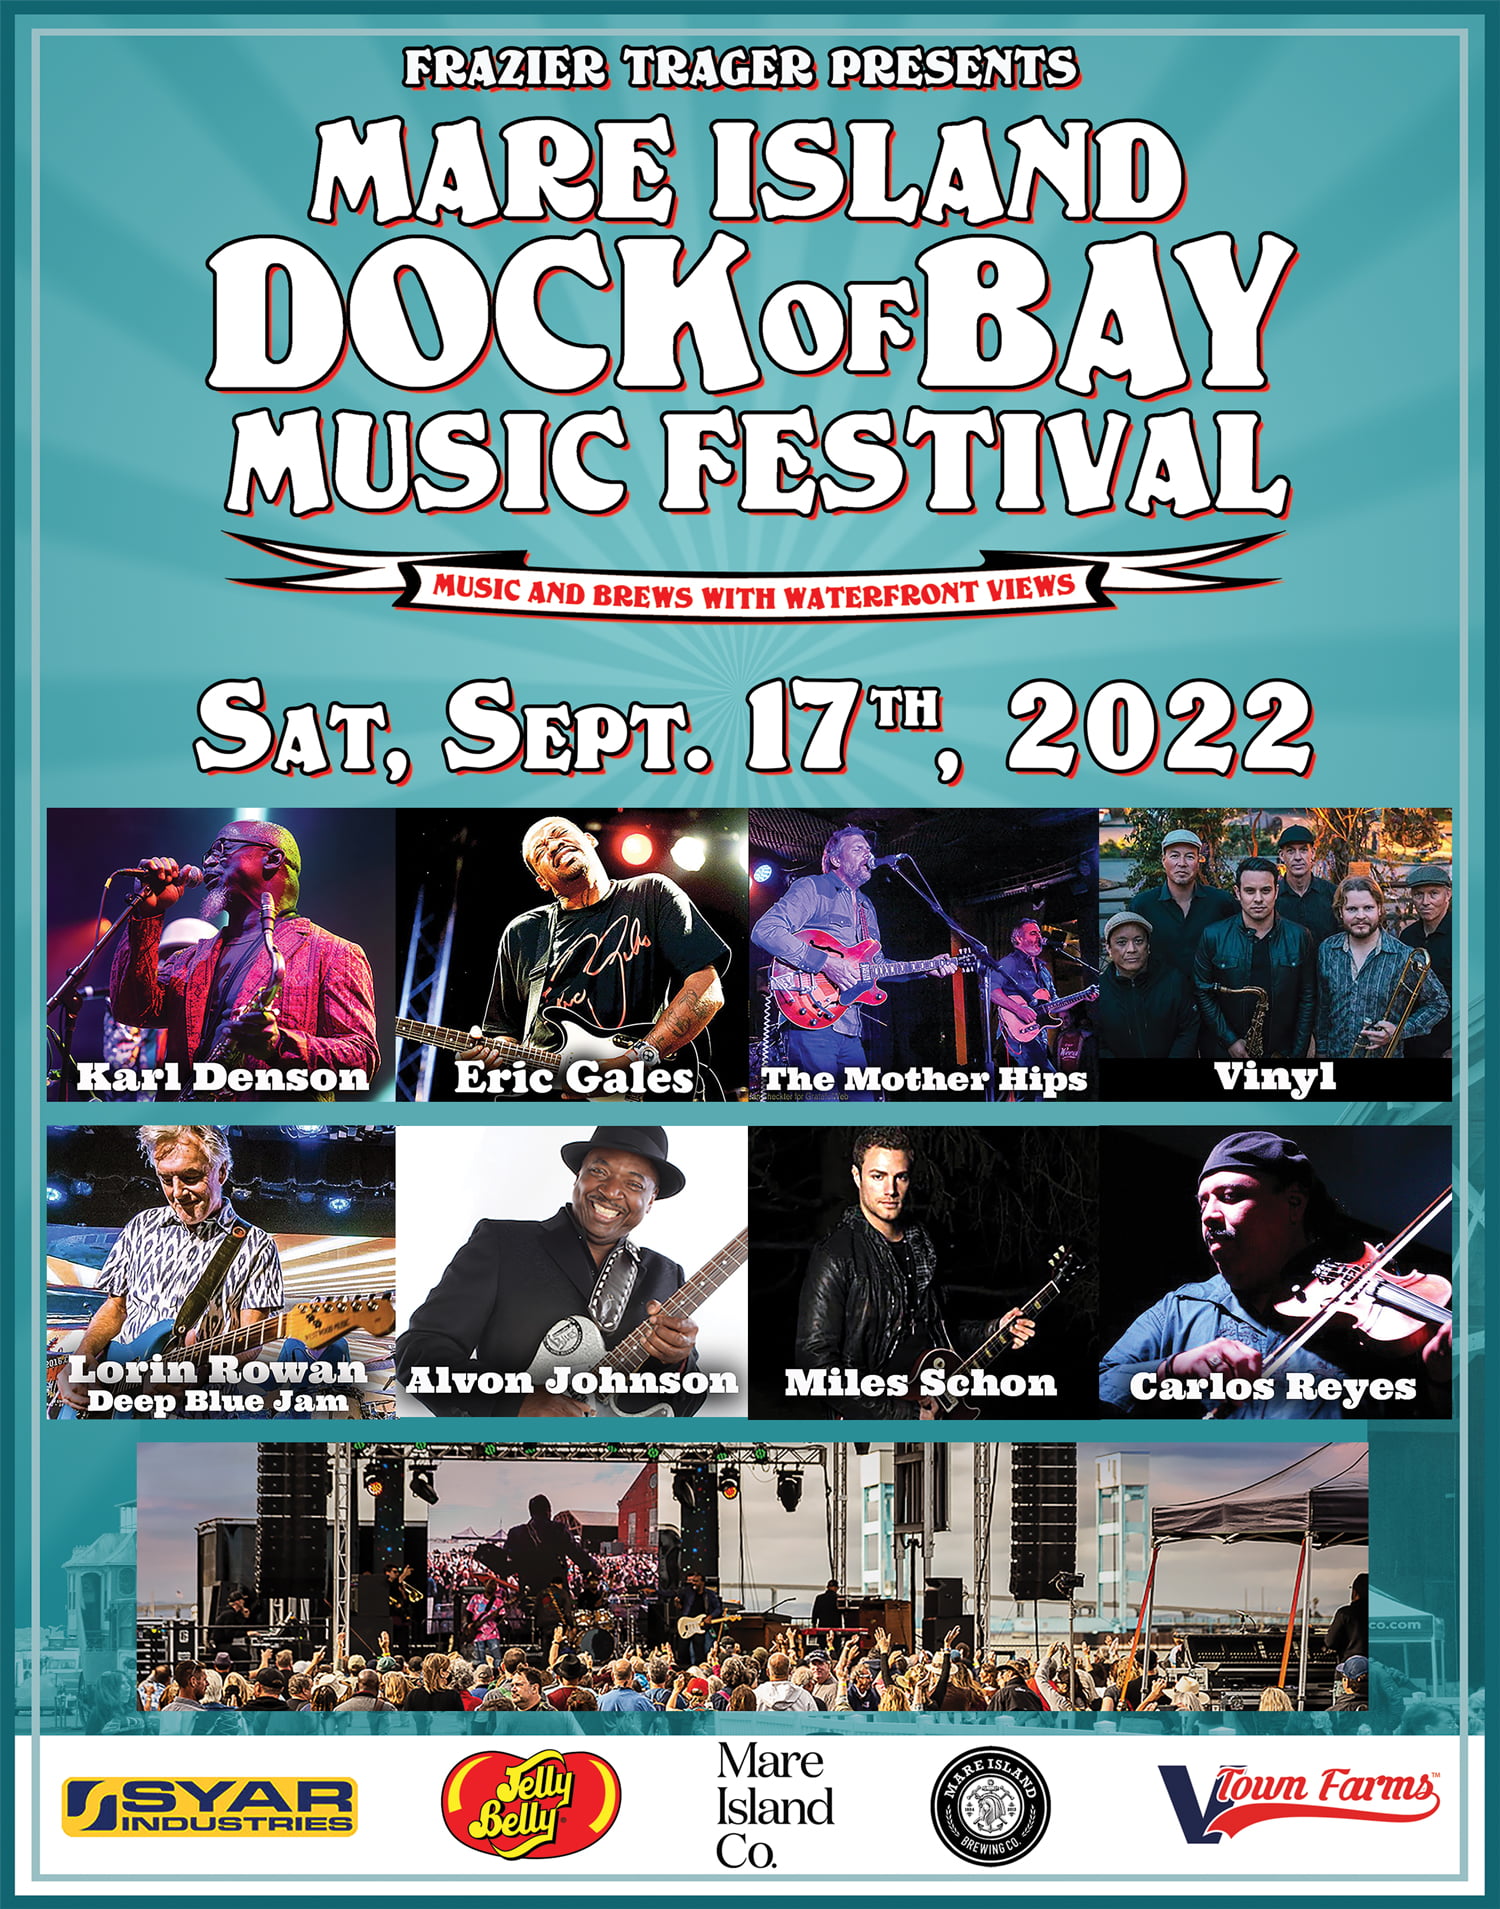 Mare Island Dock of Bay Festival 2022 - Frazier Trager Presents